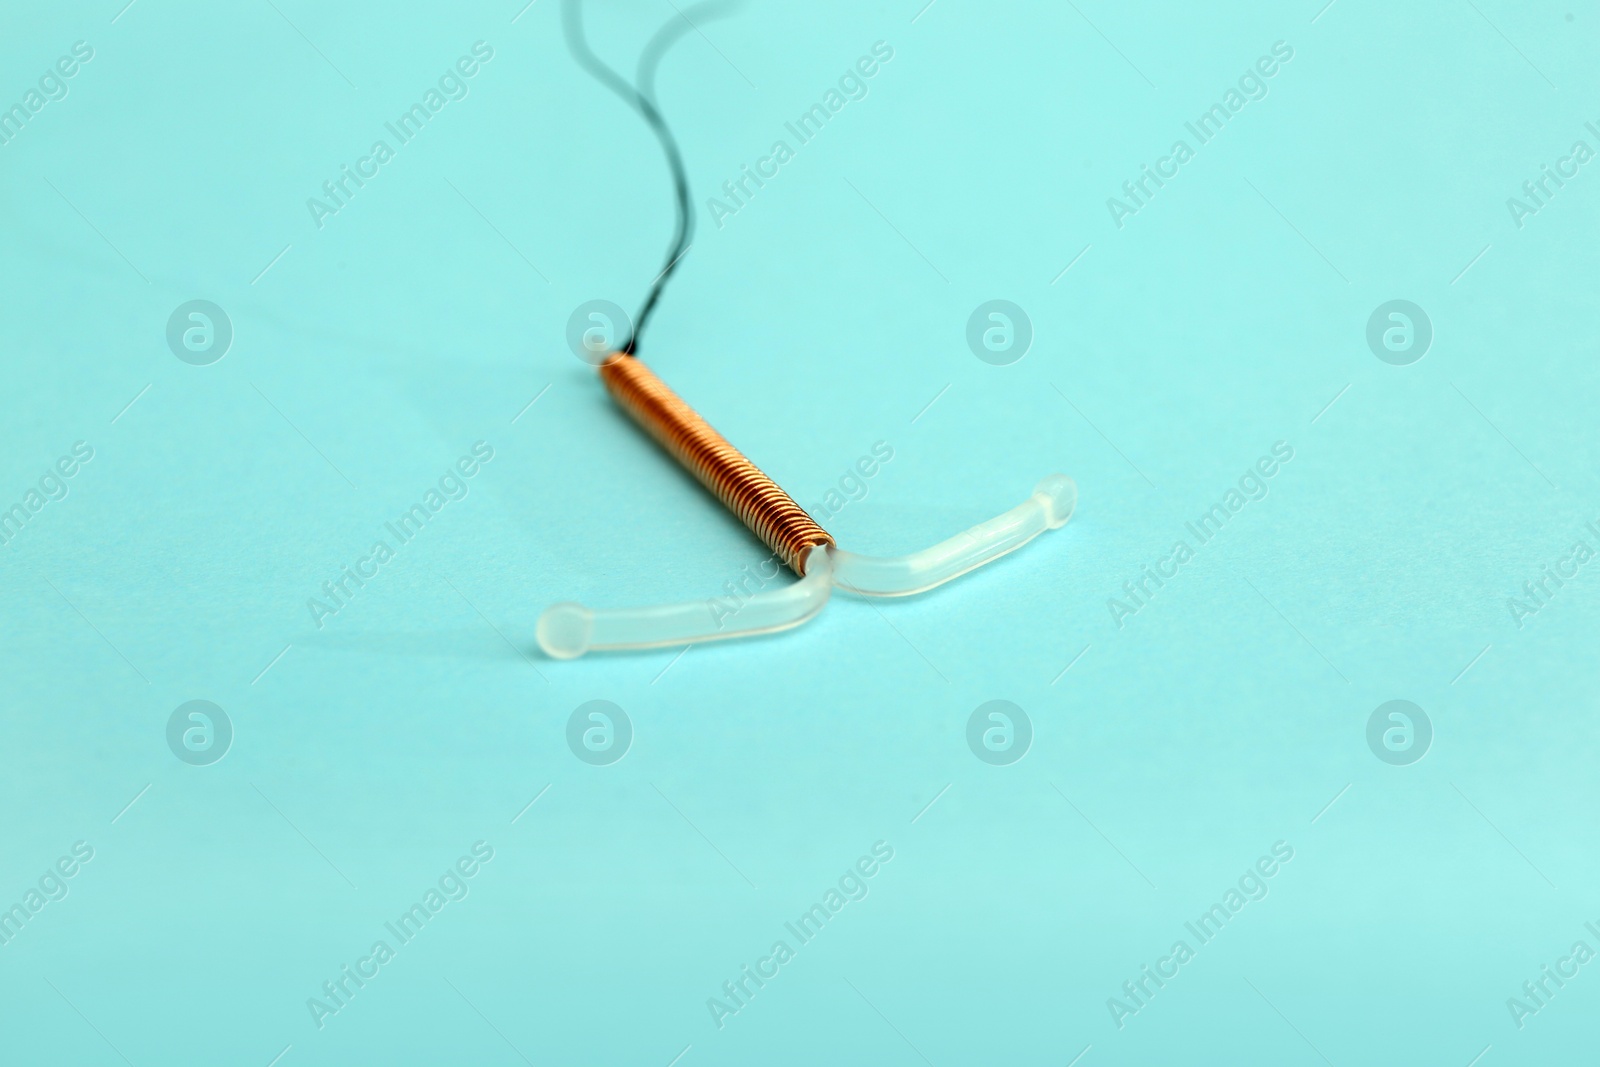 Photo of T-shaped intrauterine birth control device on turquoise background